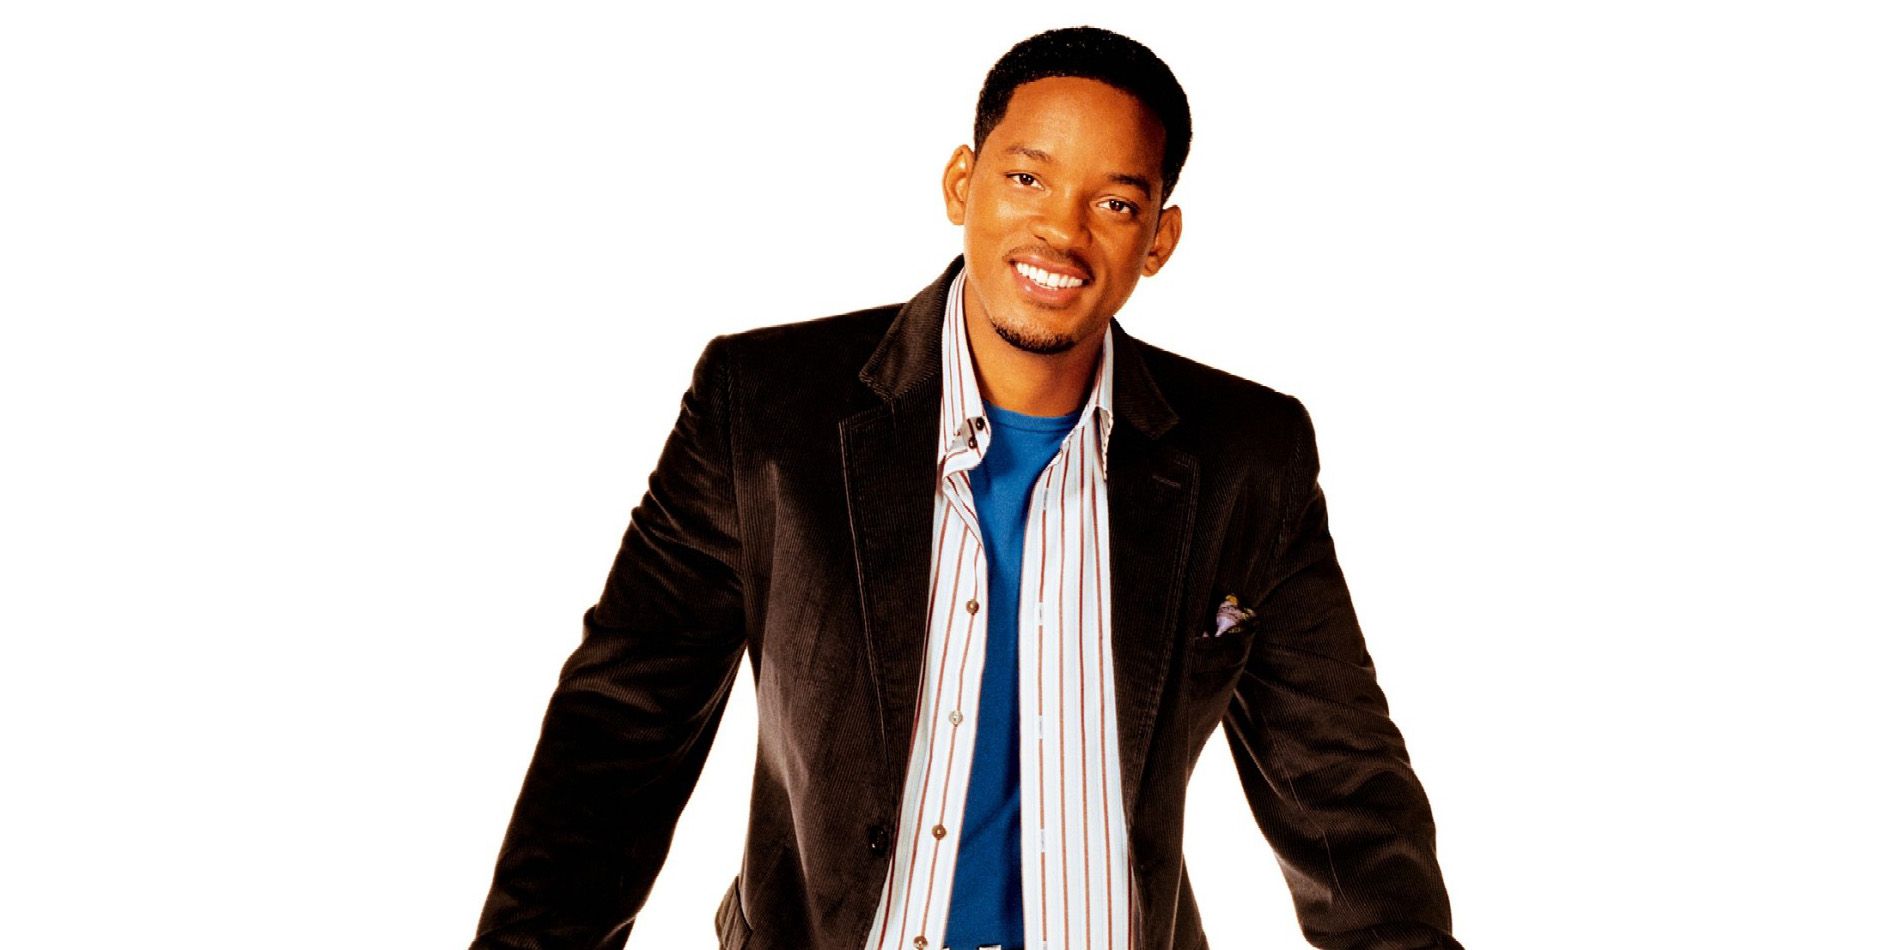 Will Smith smiling in the poster for Hitch